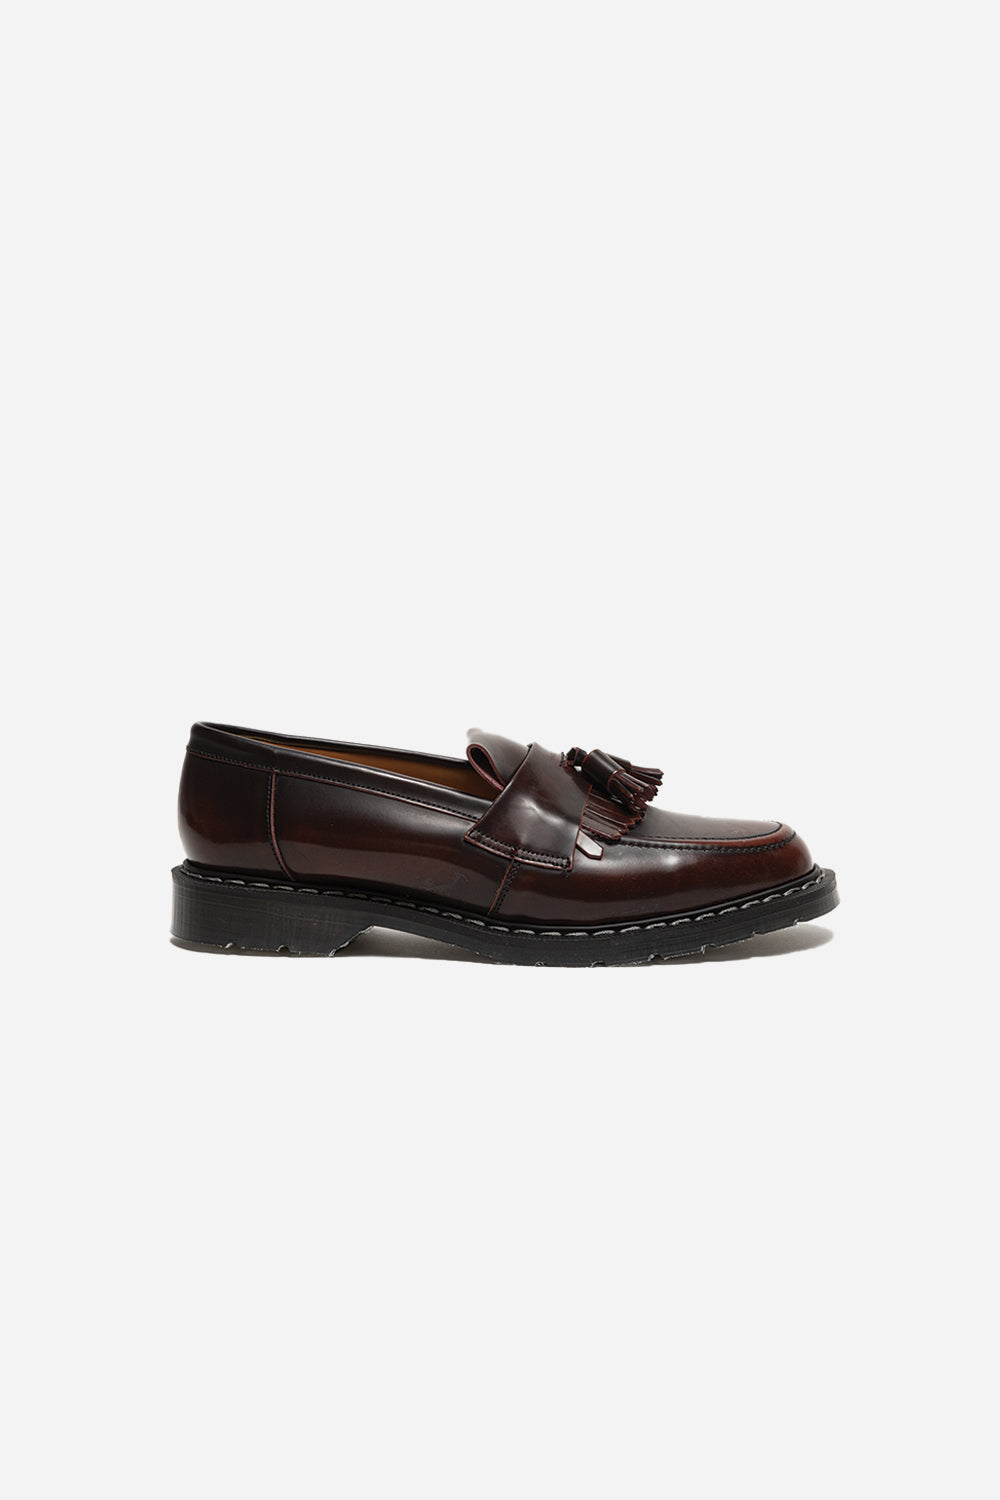 Solovair Tassel Loafer in Burgundy Rub-Off | Wallace Mercantile Shop